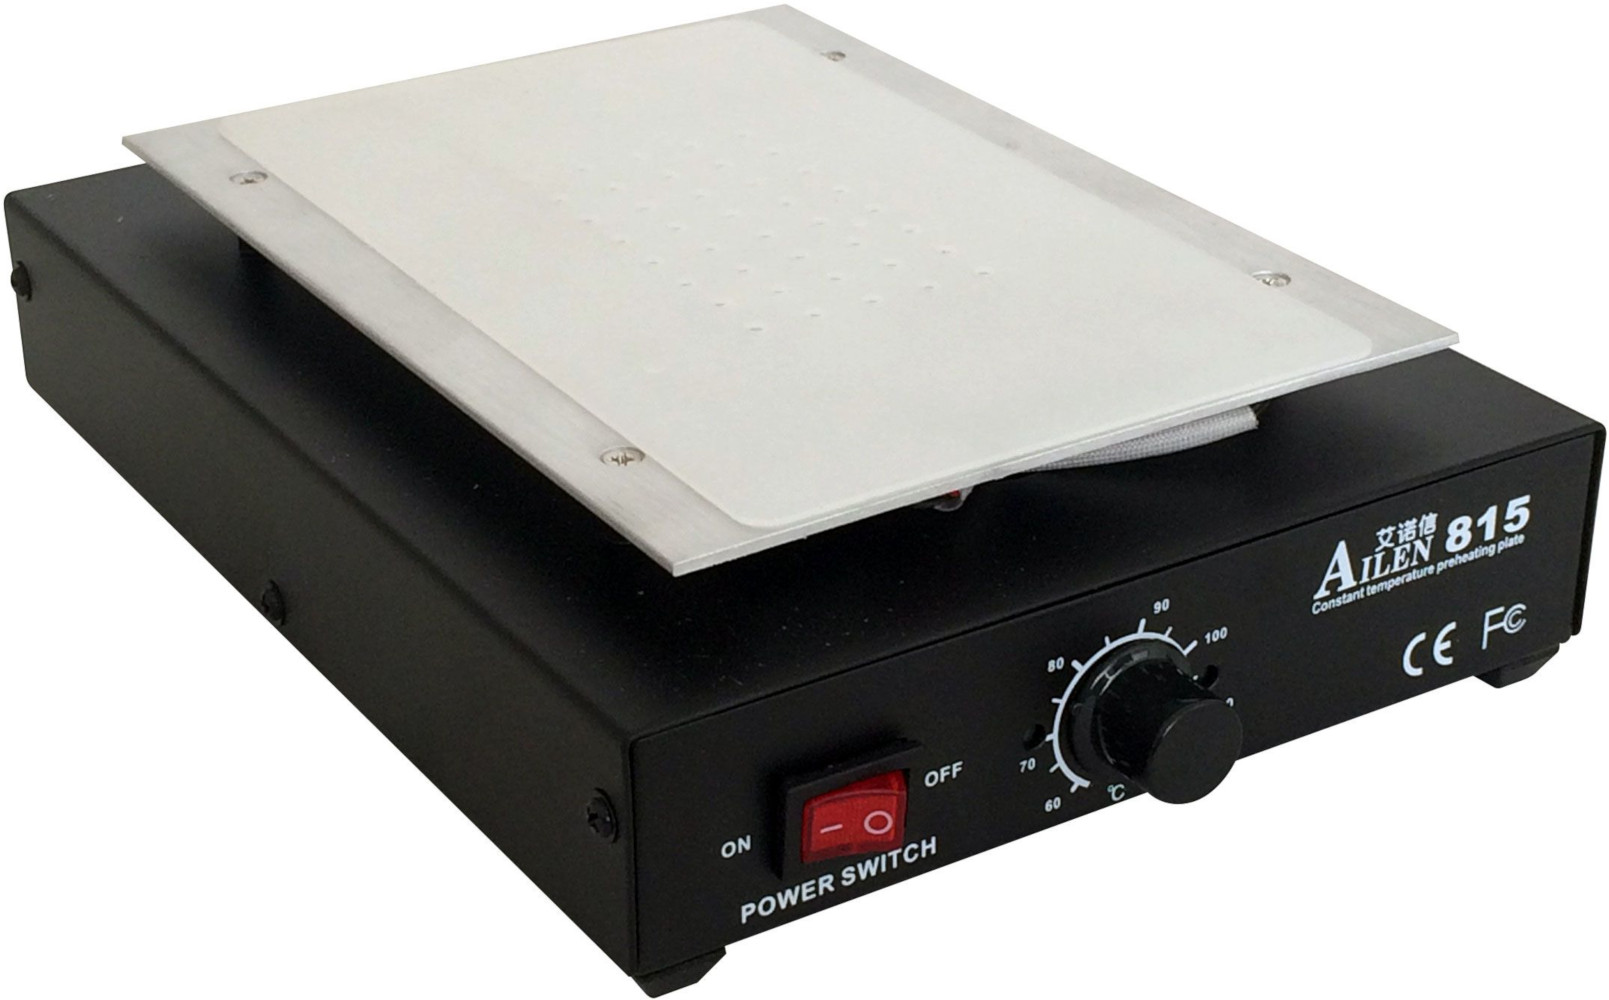 Ailen 815 Analogic Hot Plate System